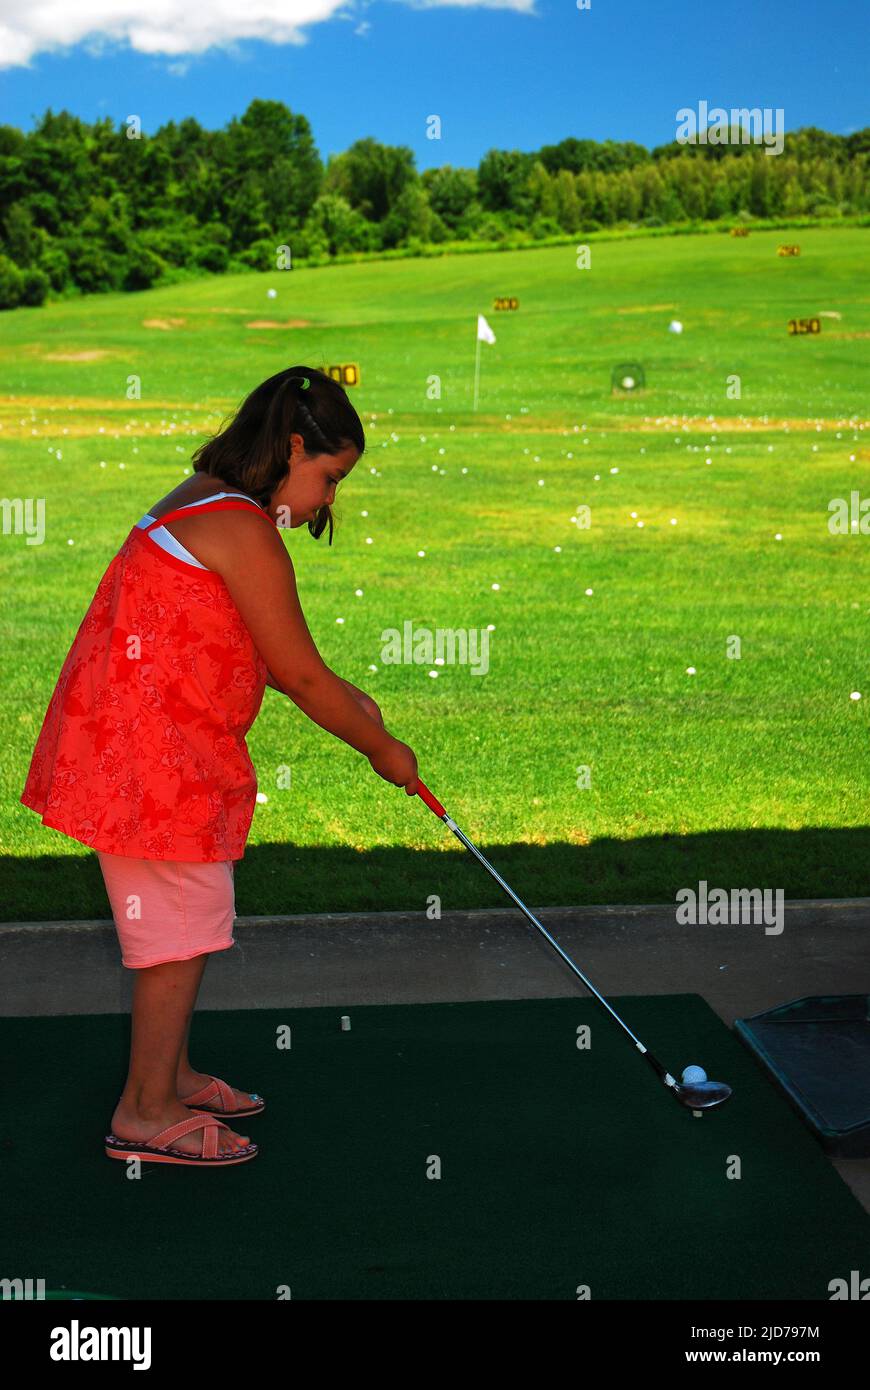 A young girl tees up at a golf driving range Stock Photo